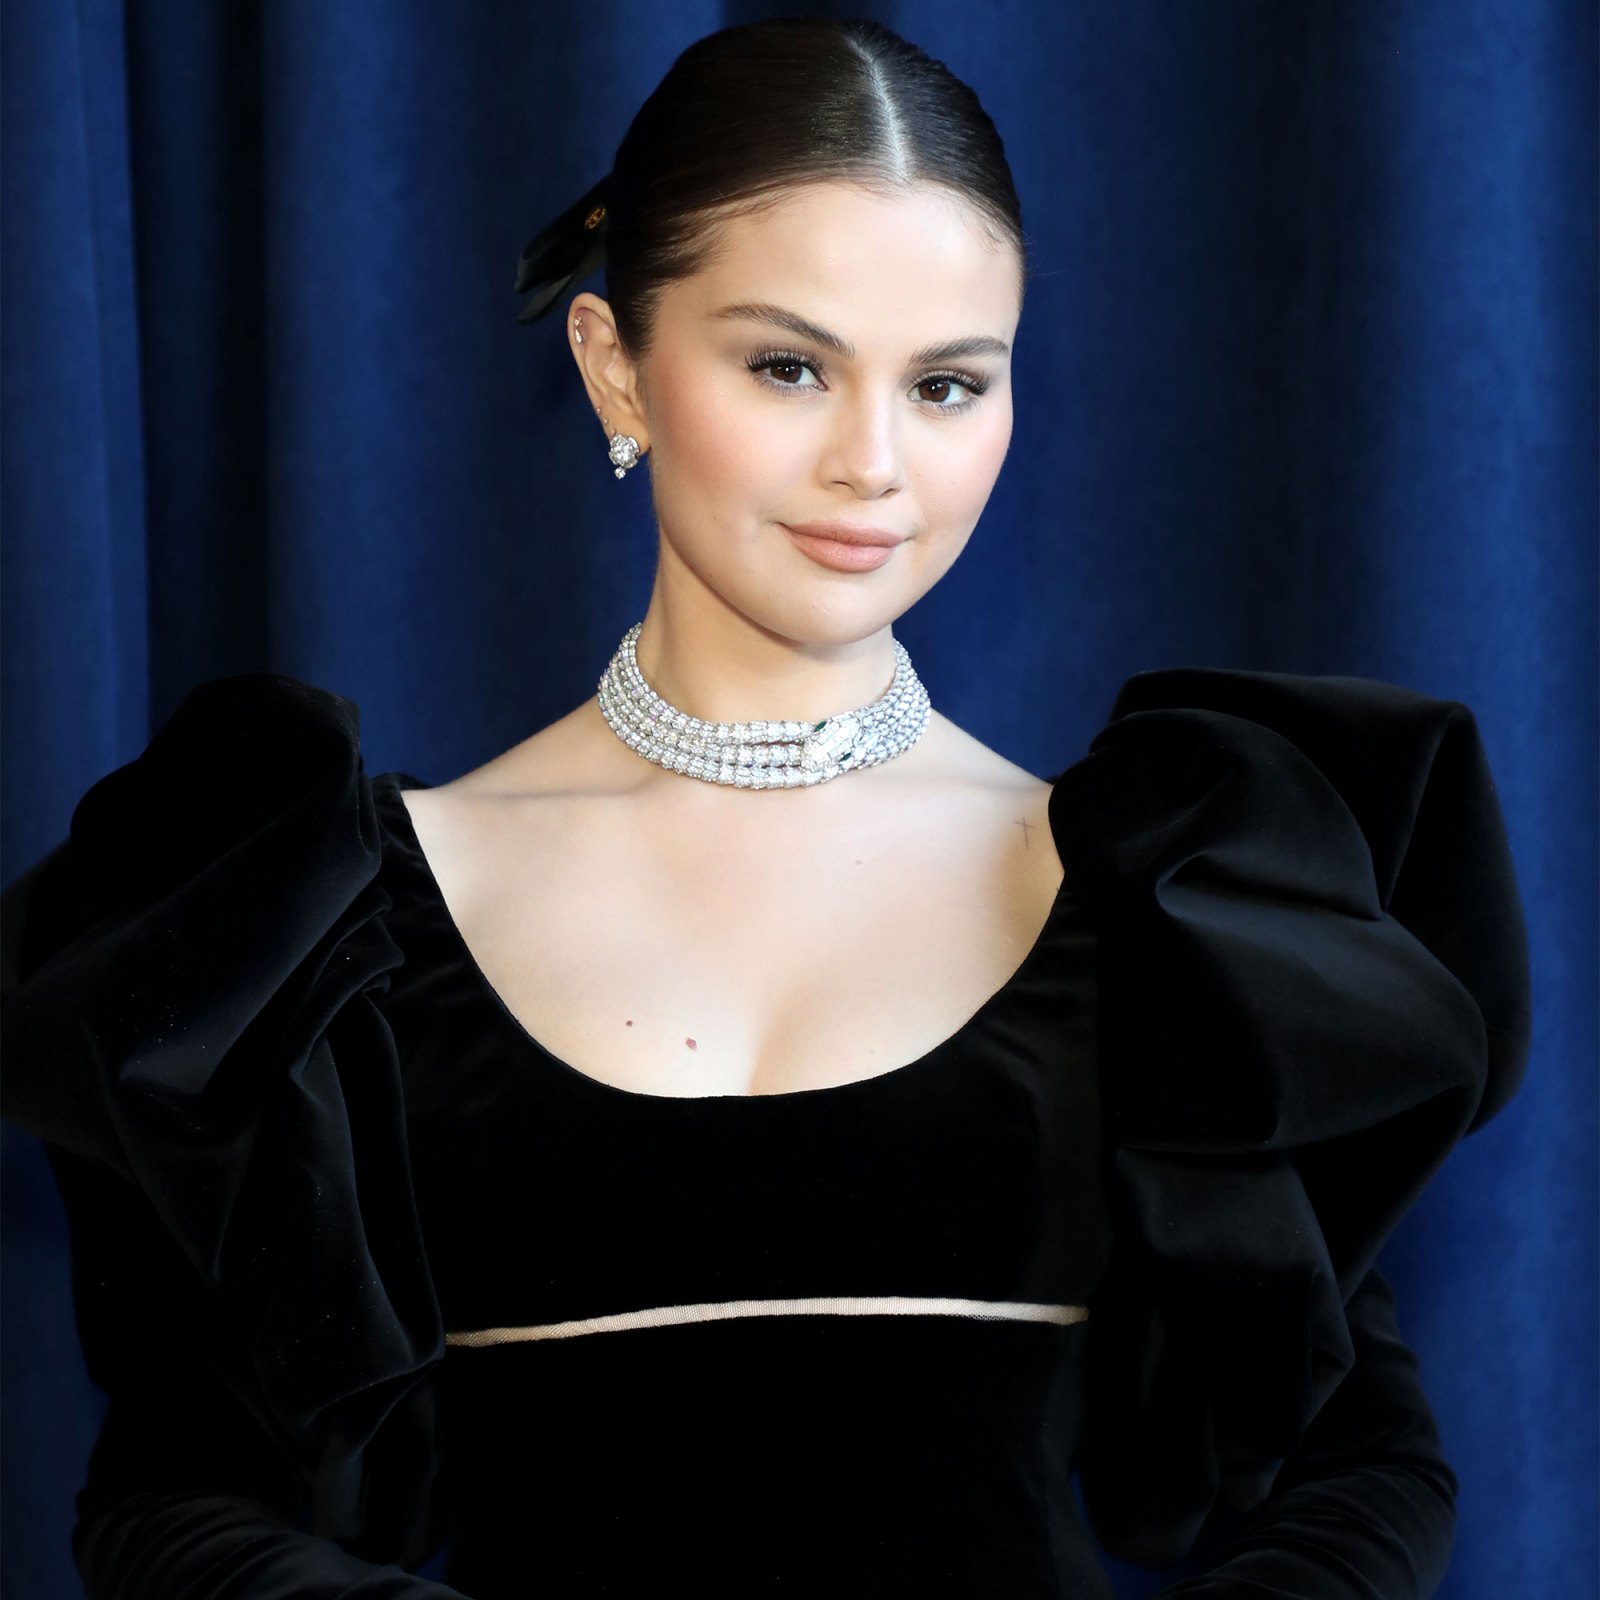 Selena Gomez’s Most Empowering Quotes About Body Positivity Over the Years